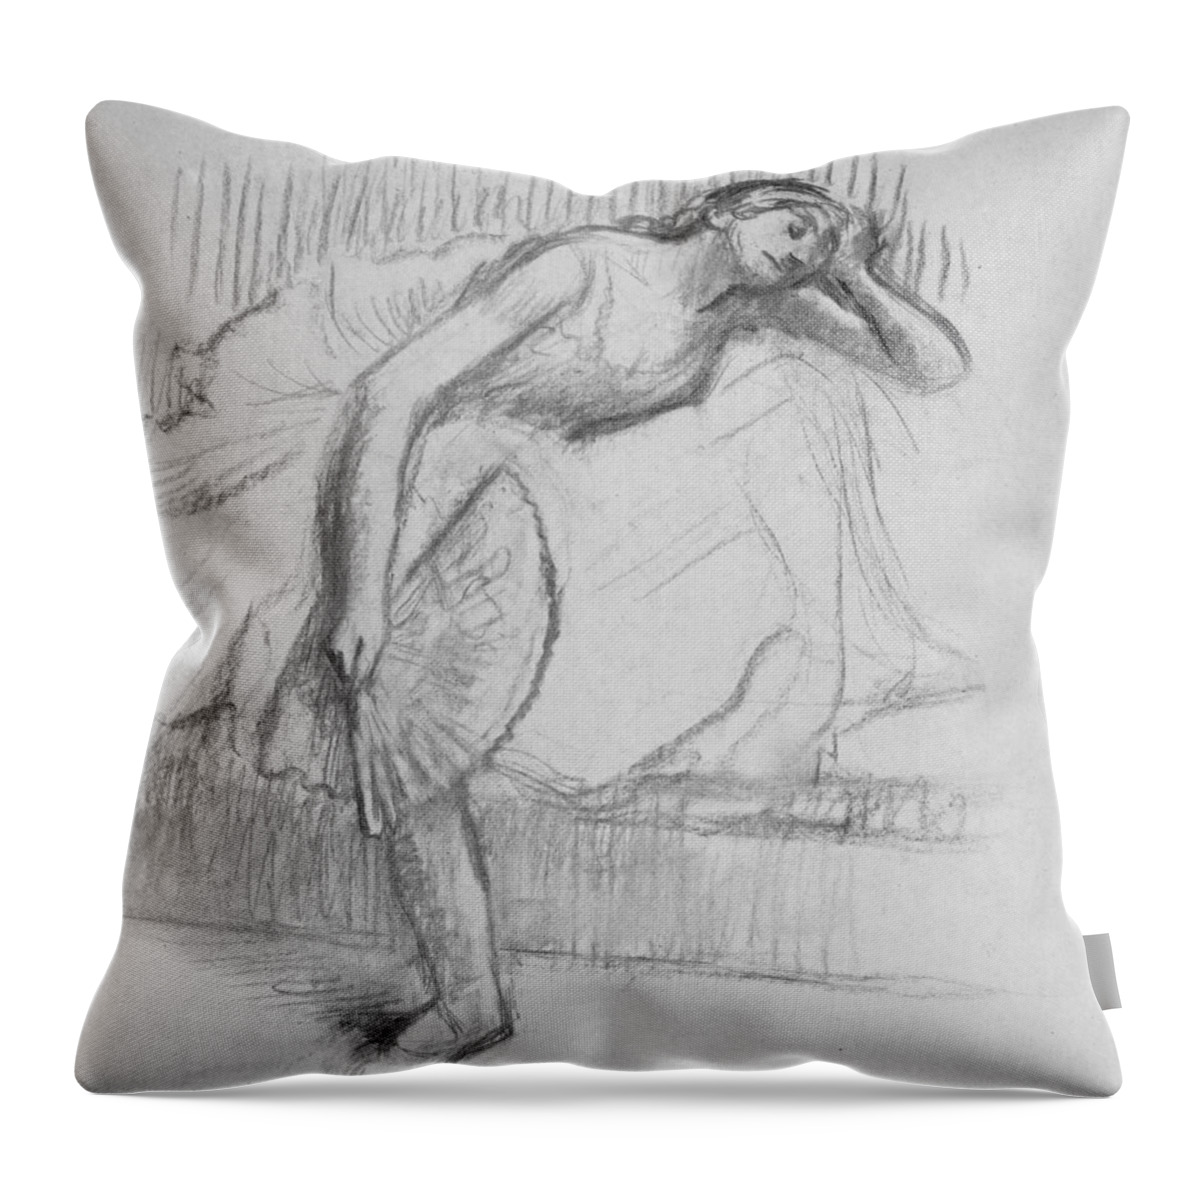 19th Century Art Throw Pillow featuring the drawing Dancer Resting with a Fan by Edgar Degas